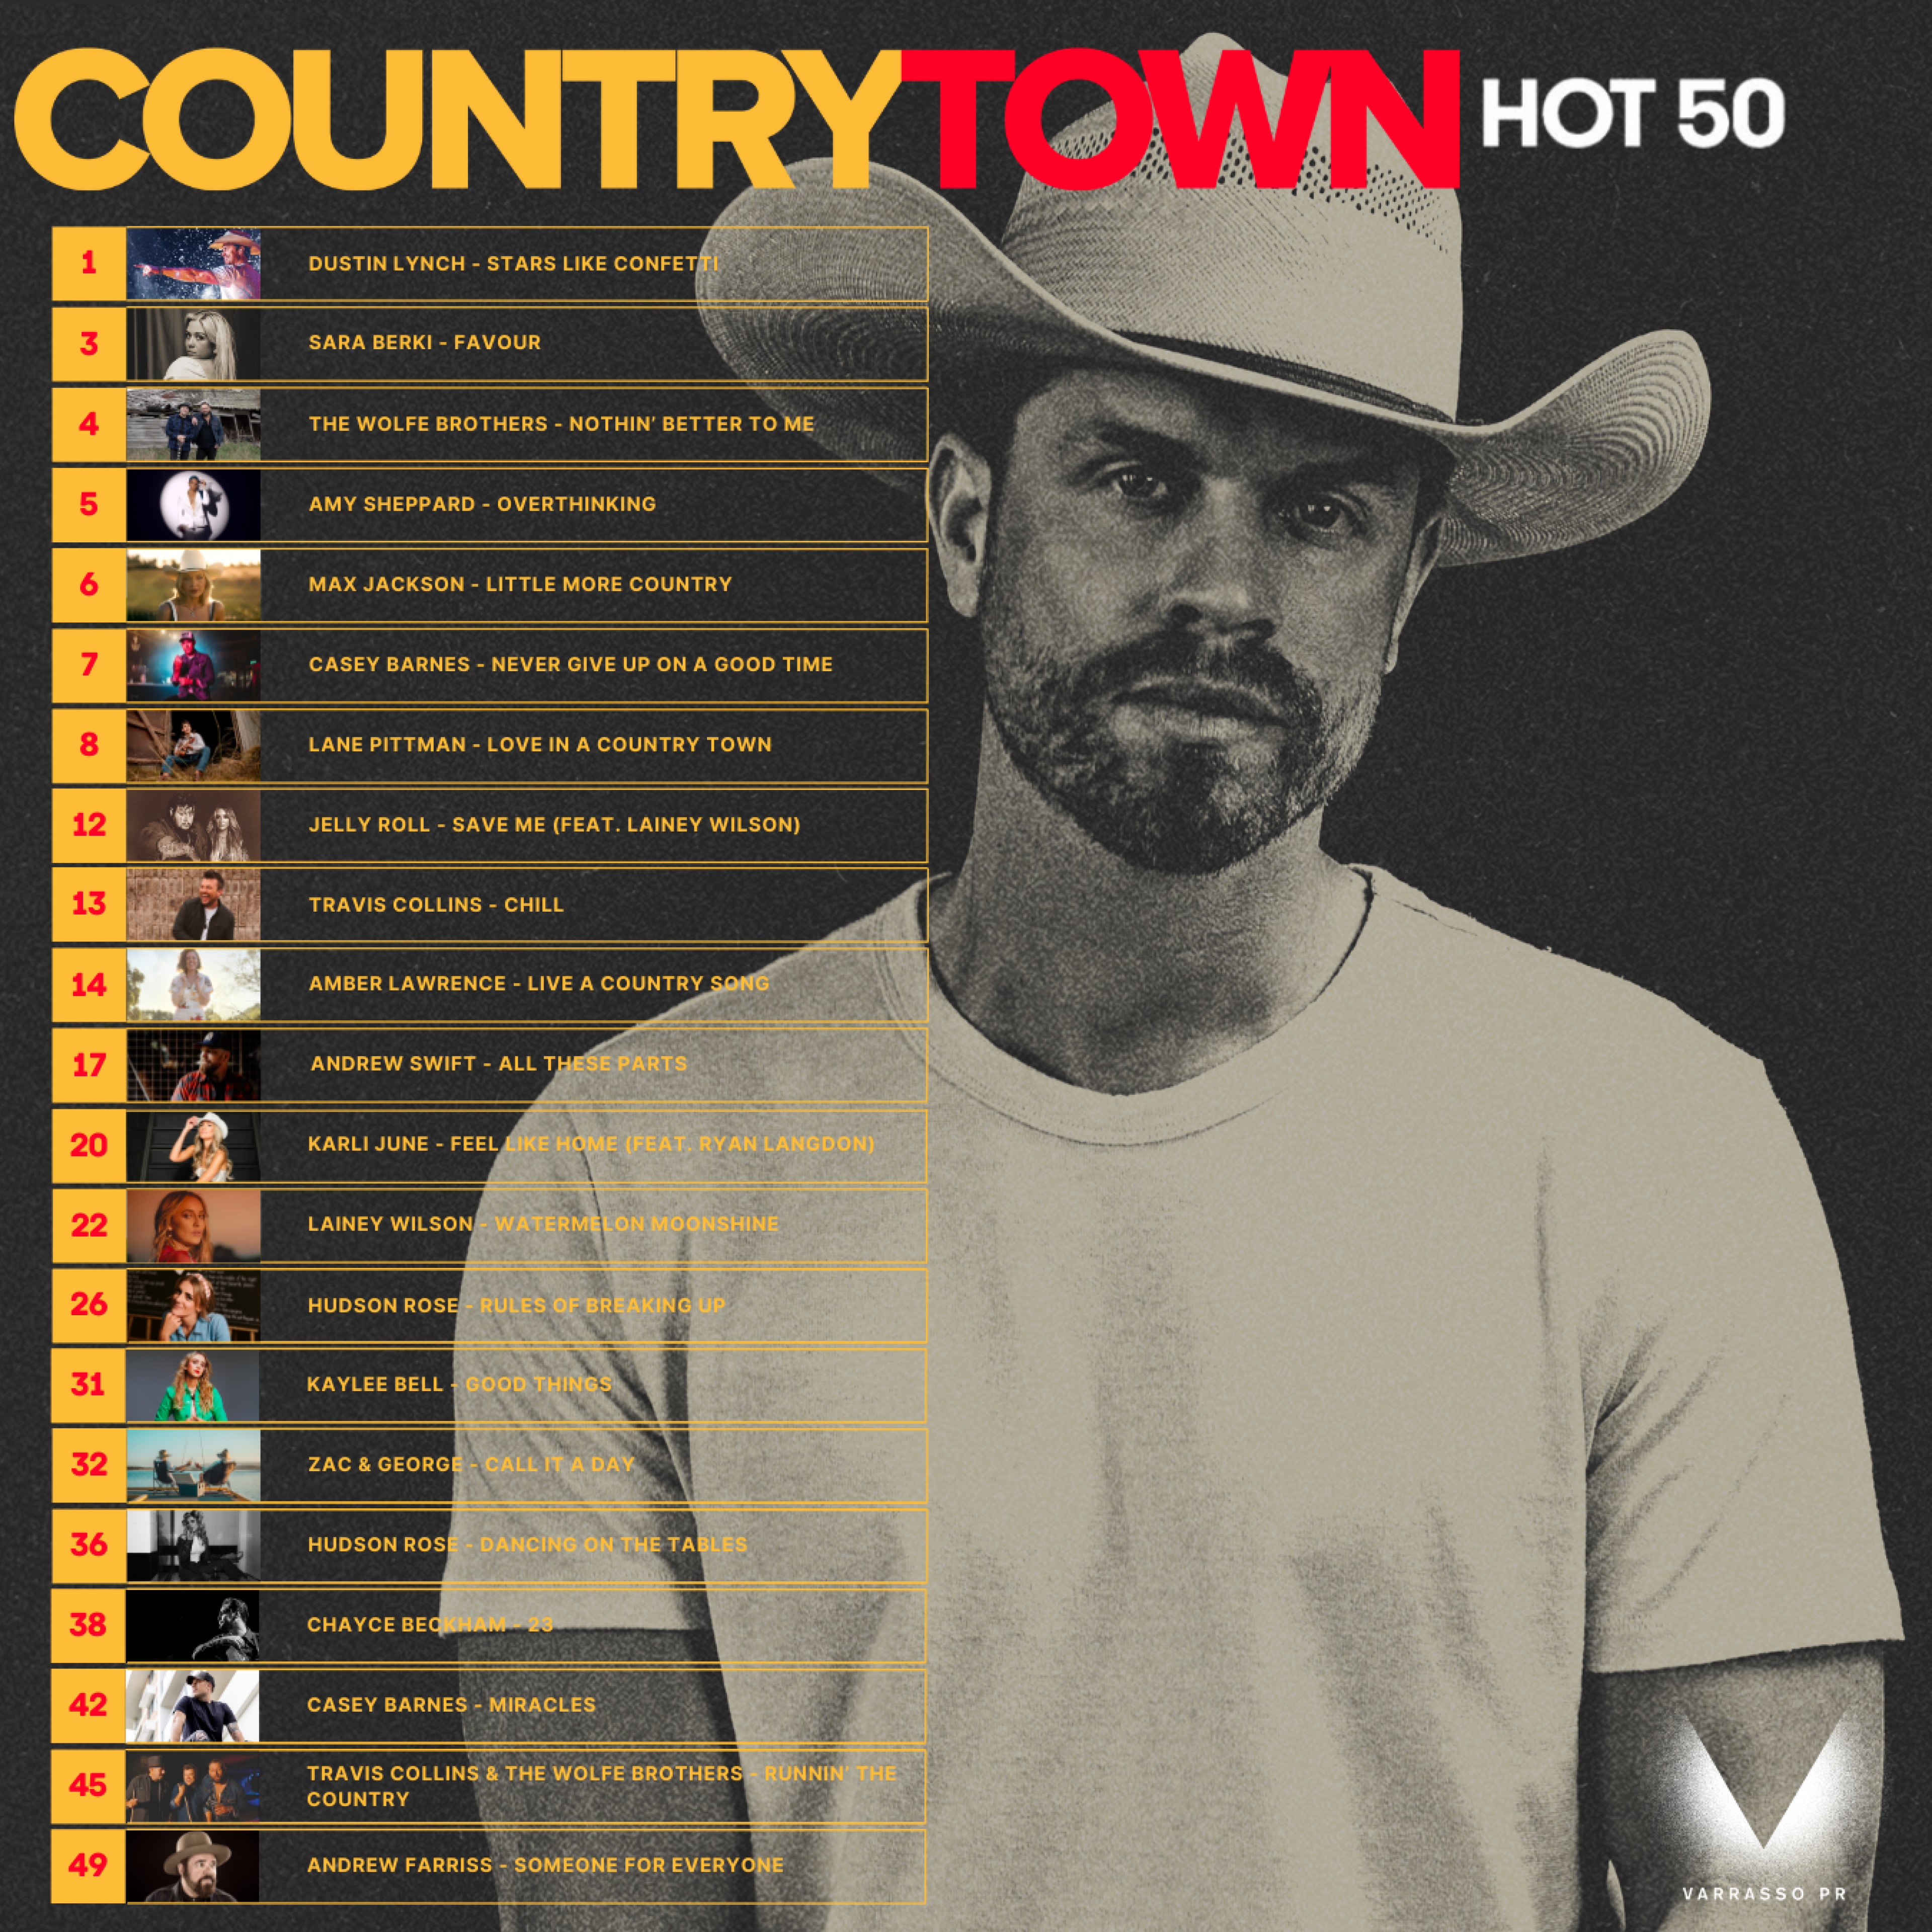 For the 4th consecutive week, Dustin Lynch maintains he's position on the top of the CountryTown National Airplay Charts